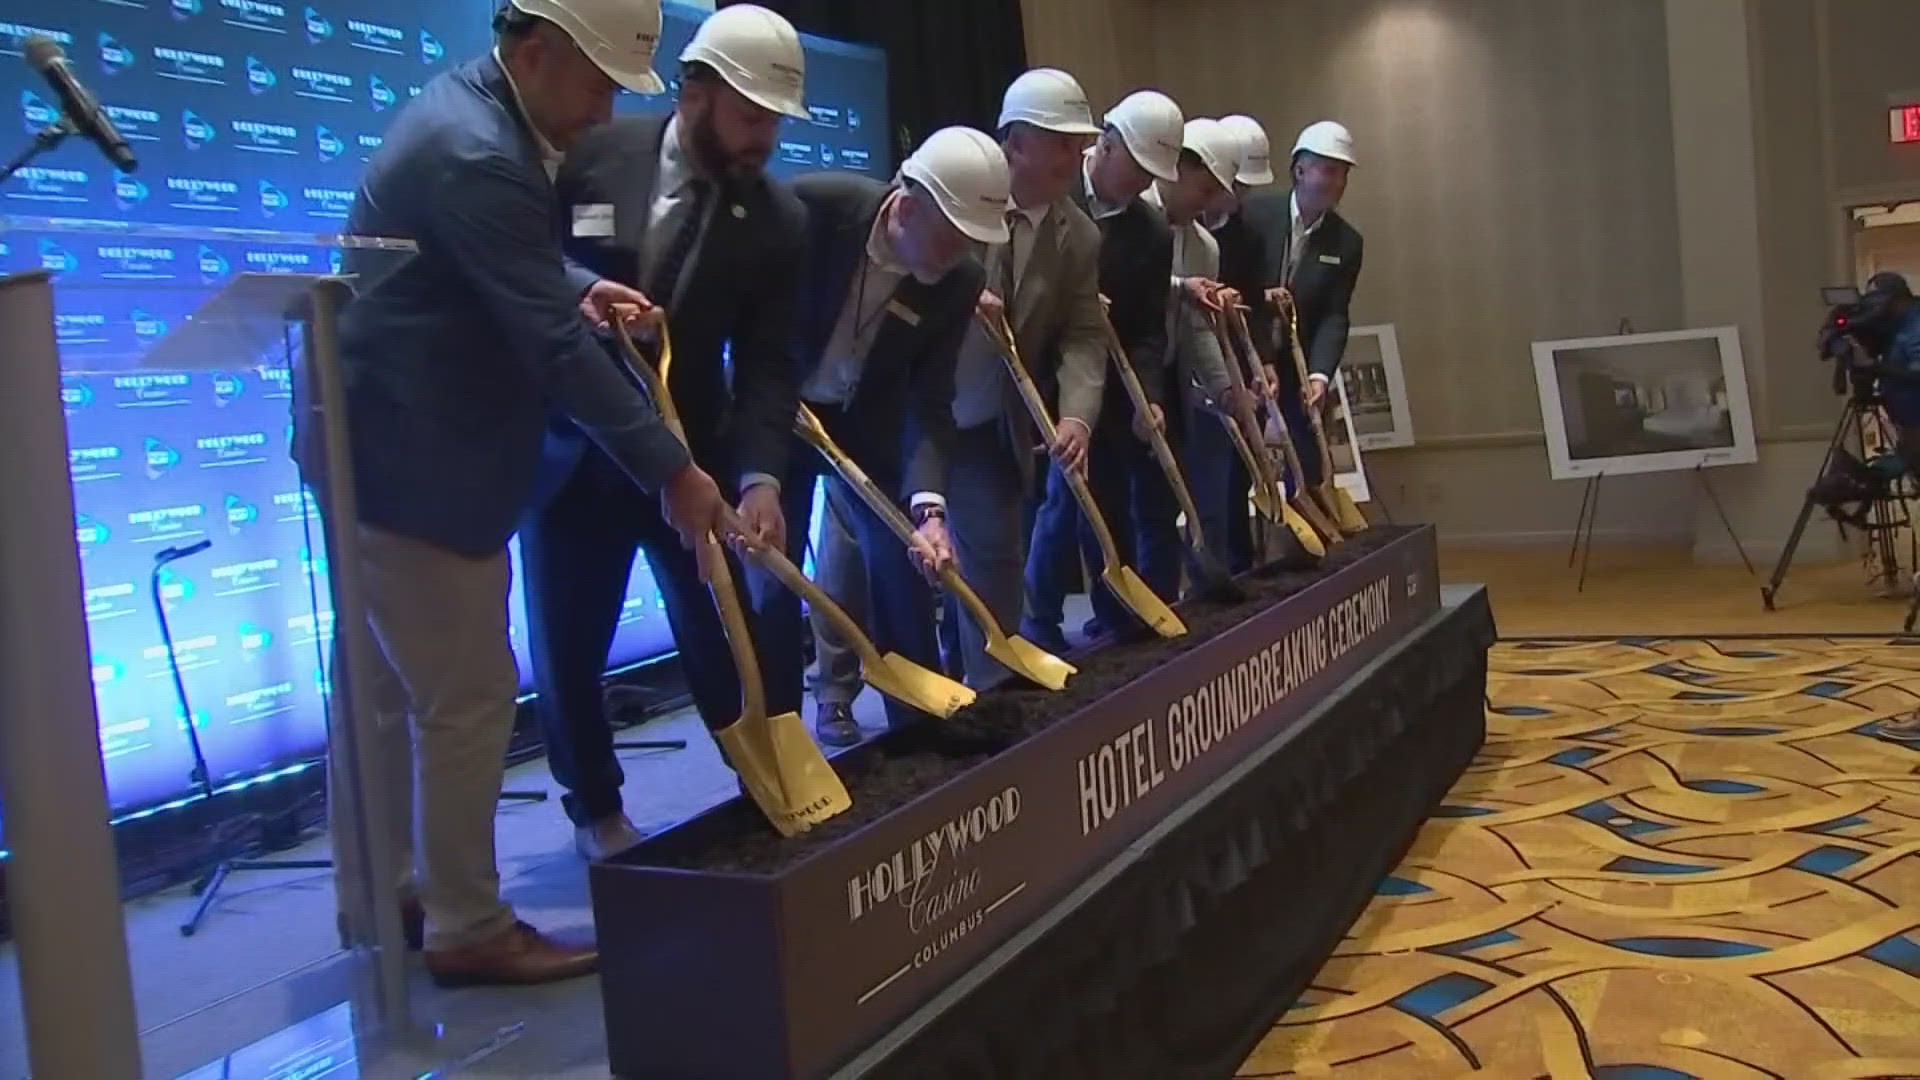 The hotel will bring temporary construction jobs and create about 100 permanent jobs within the hotel once it is complete.